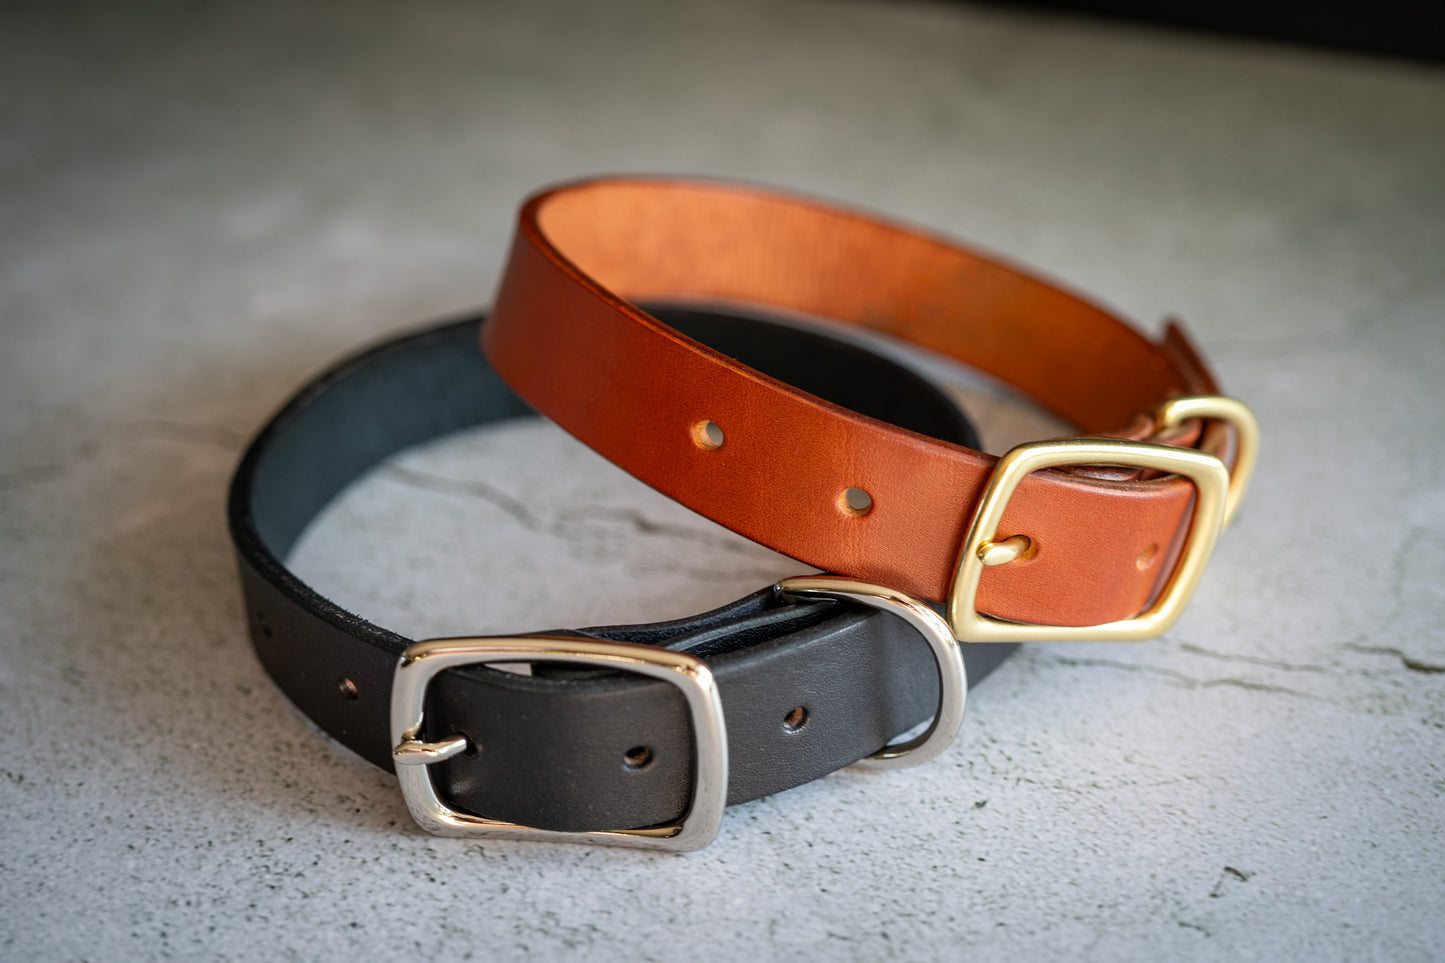 Handmade and custom leather dog collars 1 inch and 2 colors: brown and black.